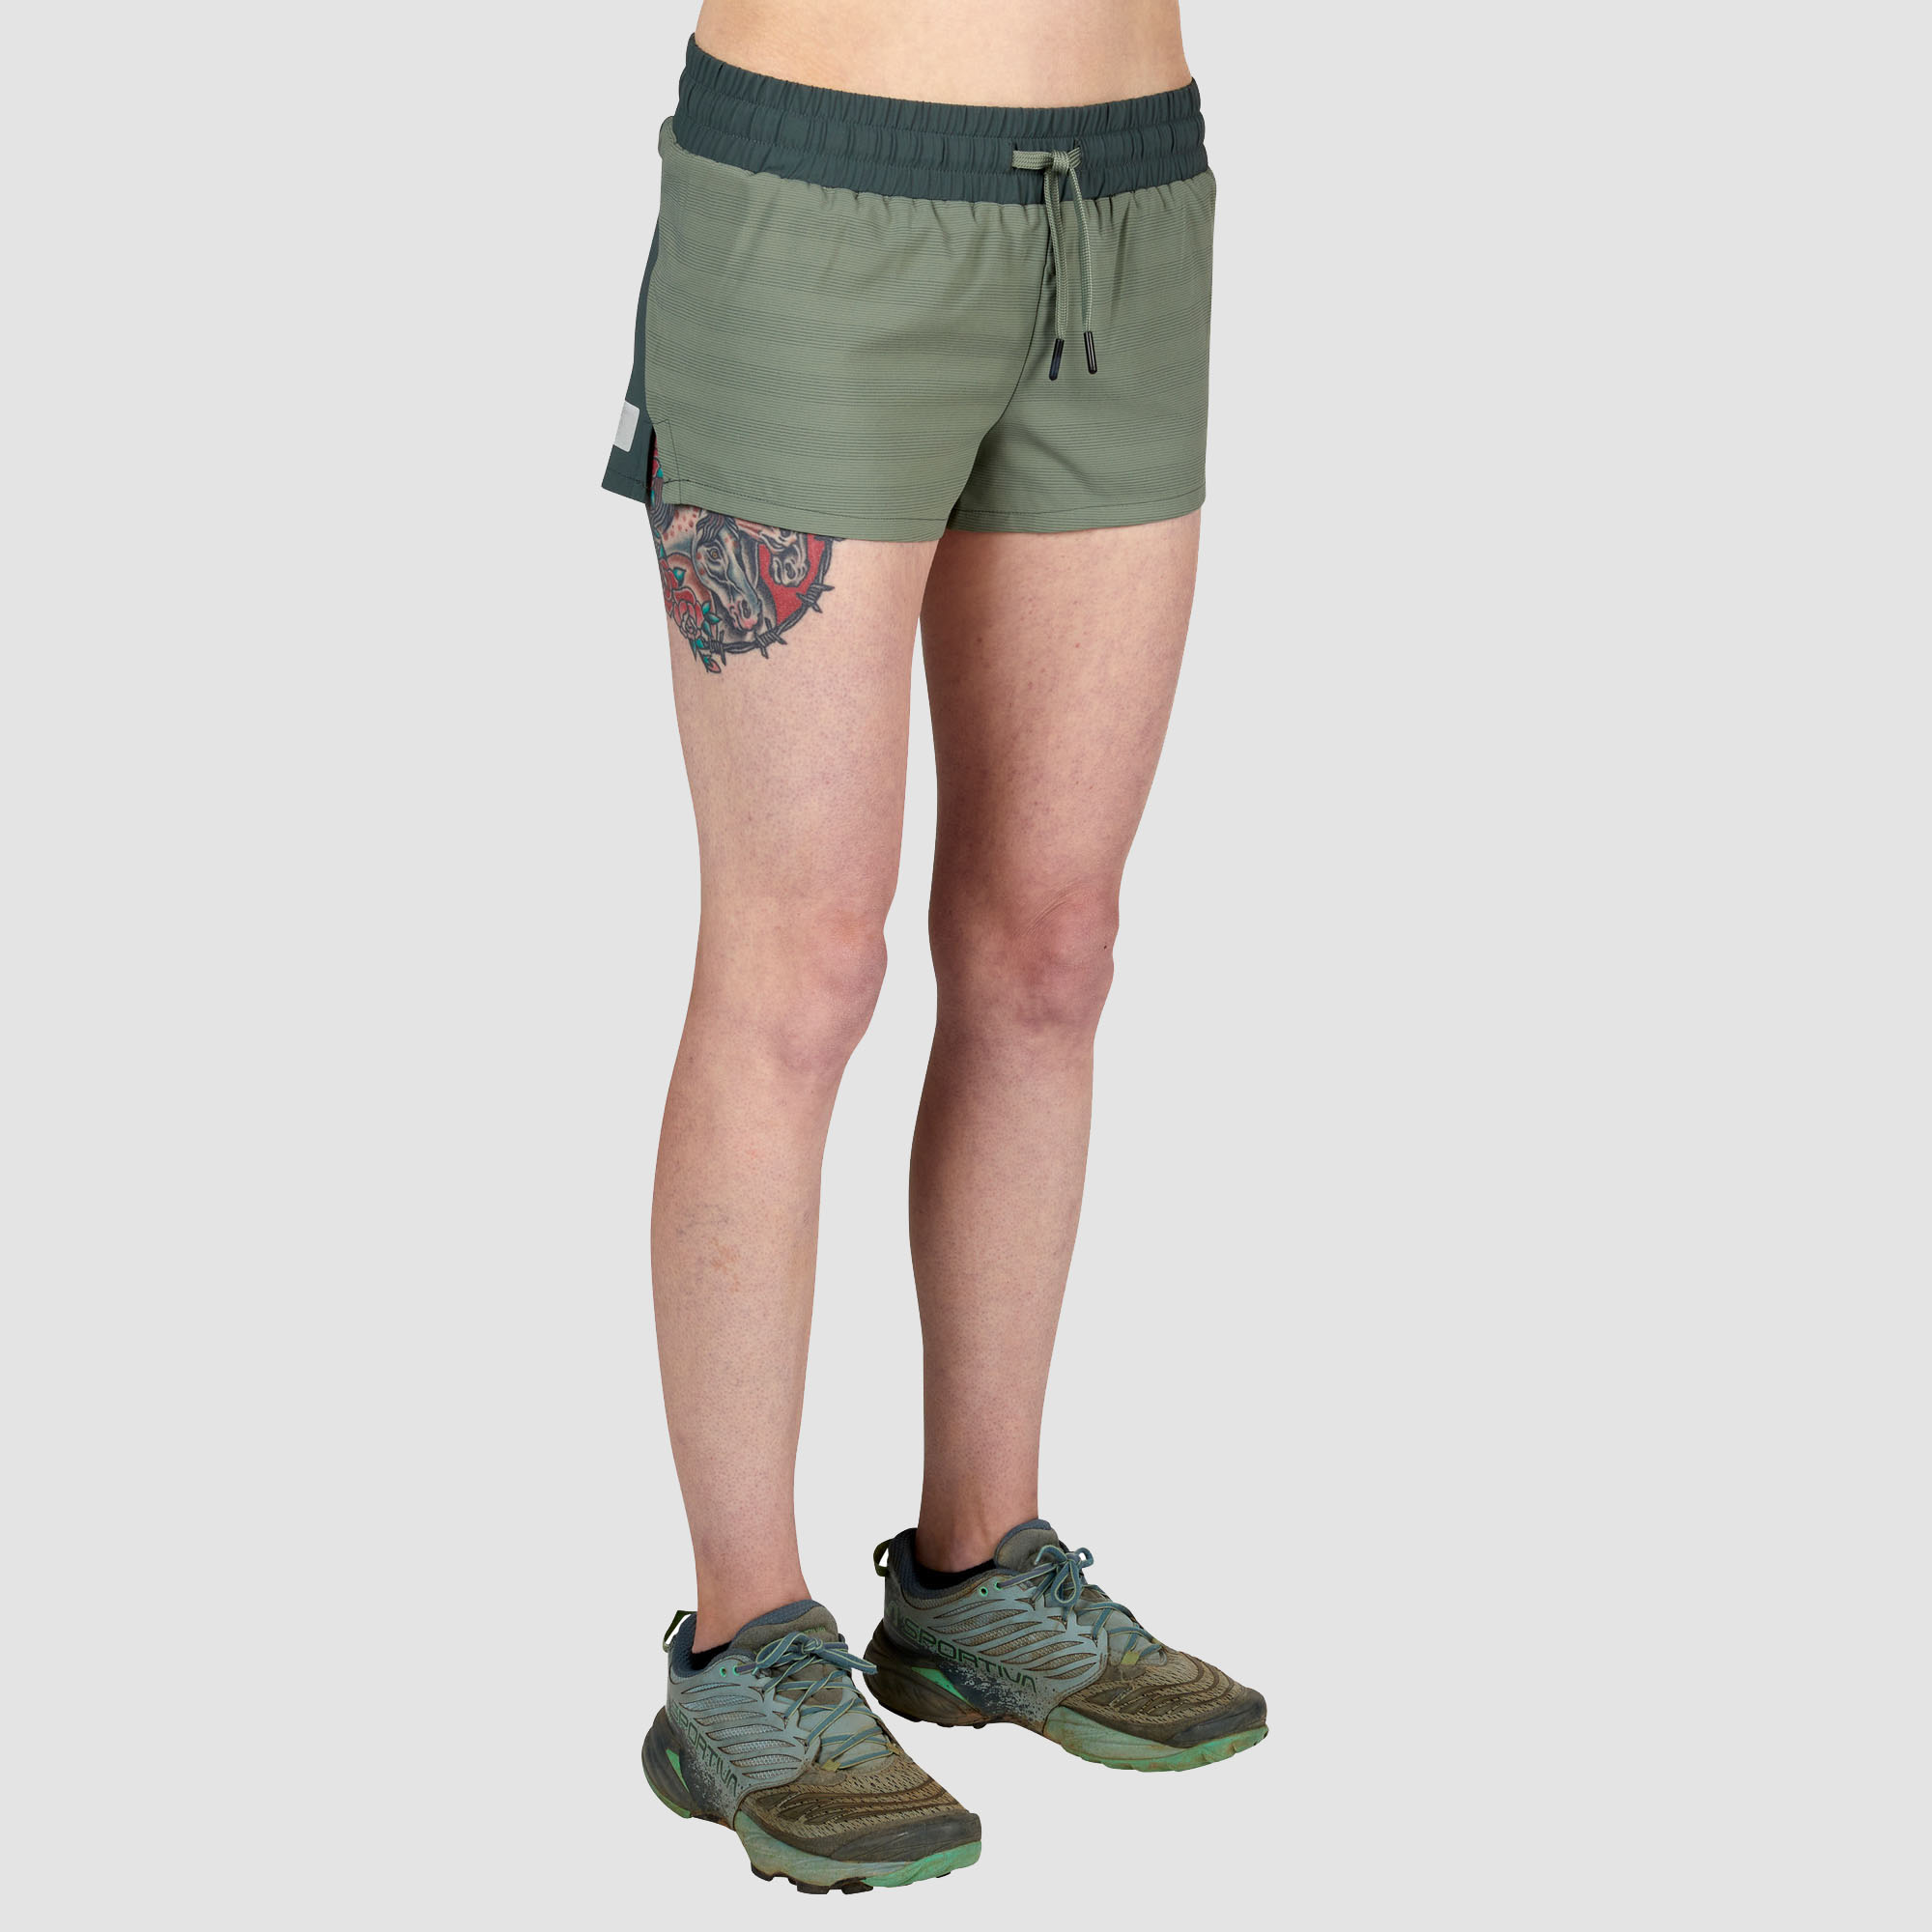 Ultimate Direction Women's Stratus Short - Prior Year in Camo Green Size XL